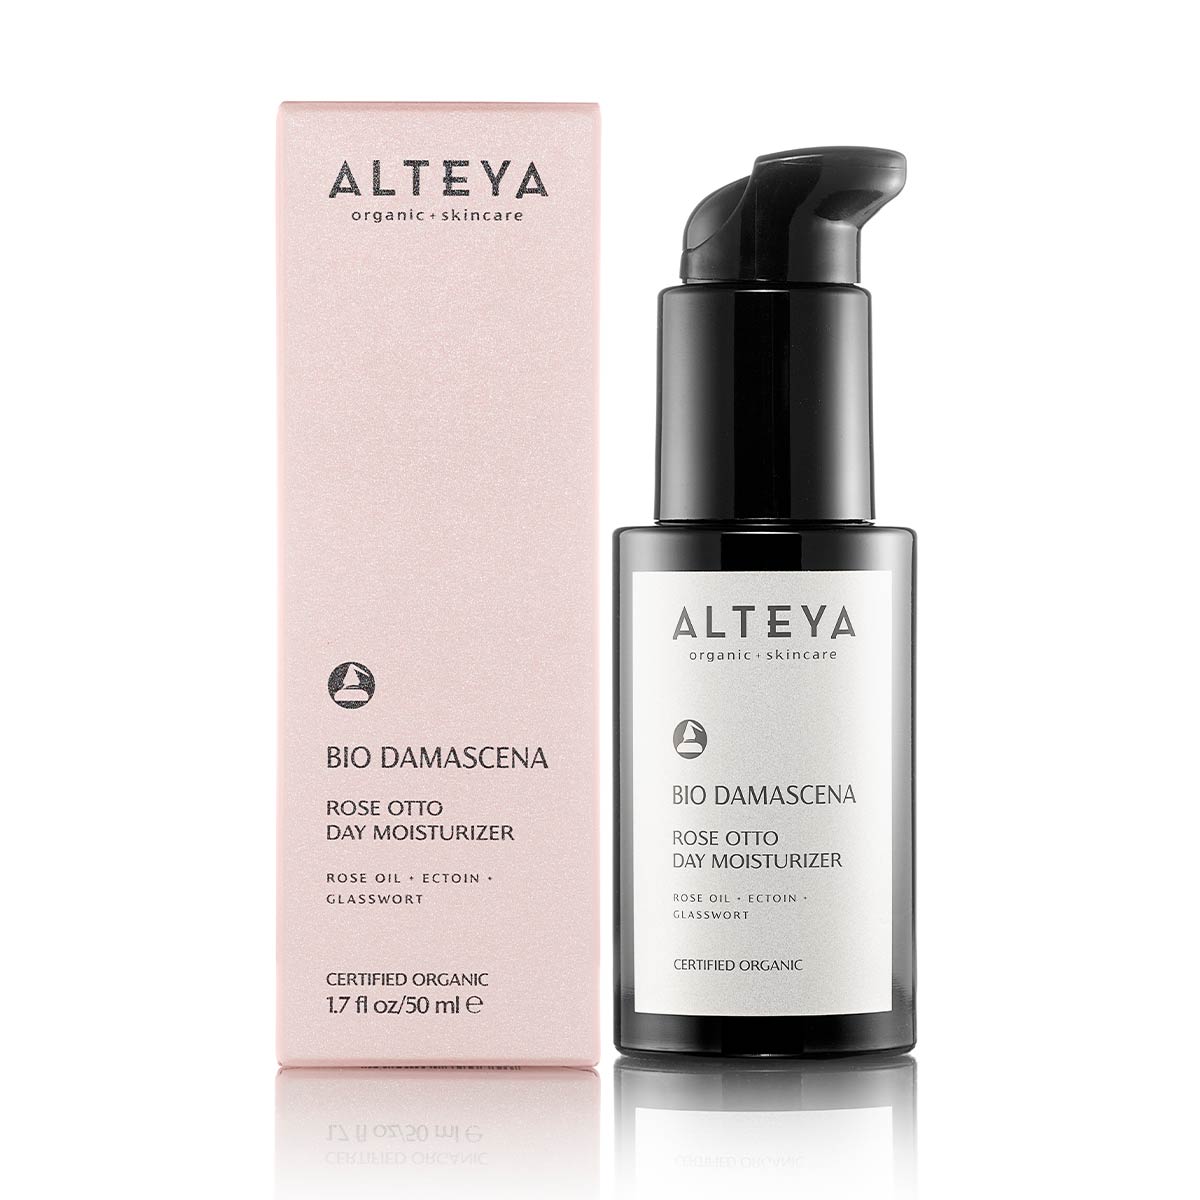 Alteya Organics' Bio Damascena Rose Otto Day Moisturizer is a moisturizer with anti-pollution properties, specially formulated for nourishing and protecting the skin.